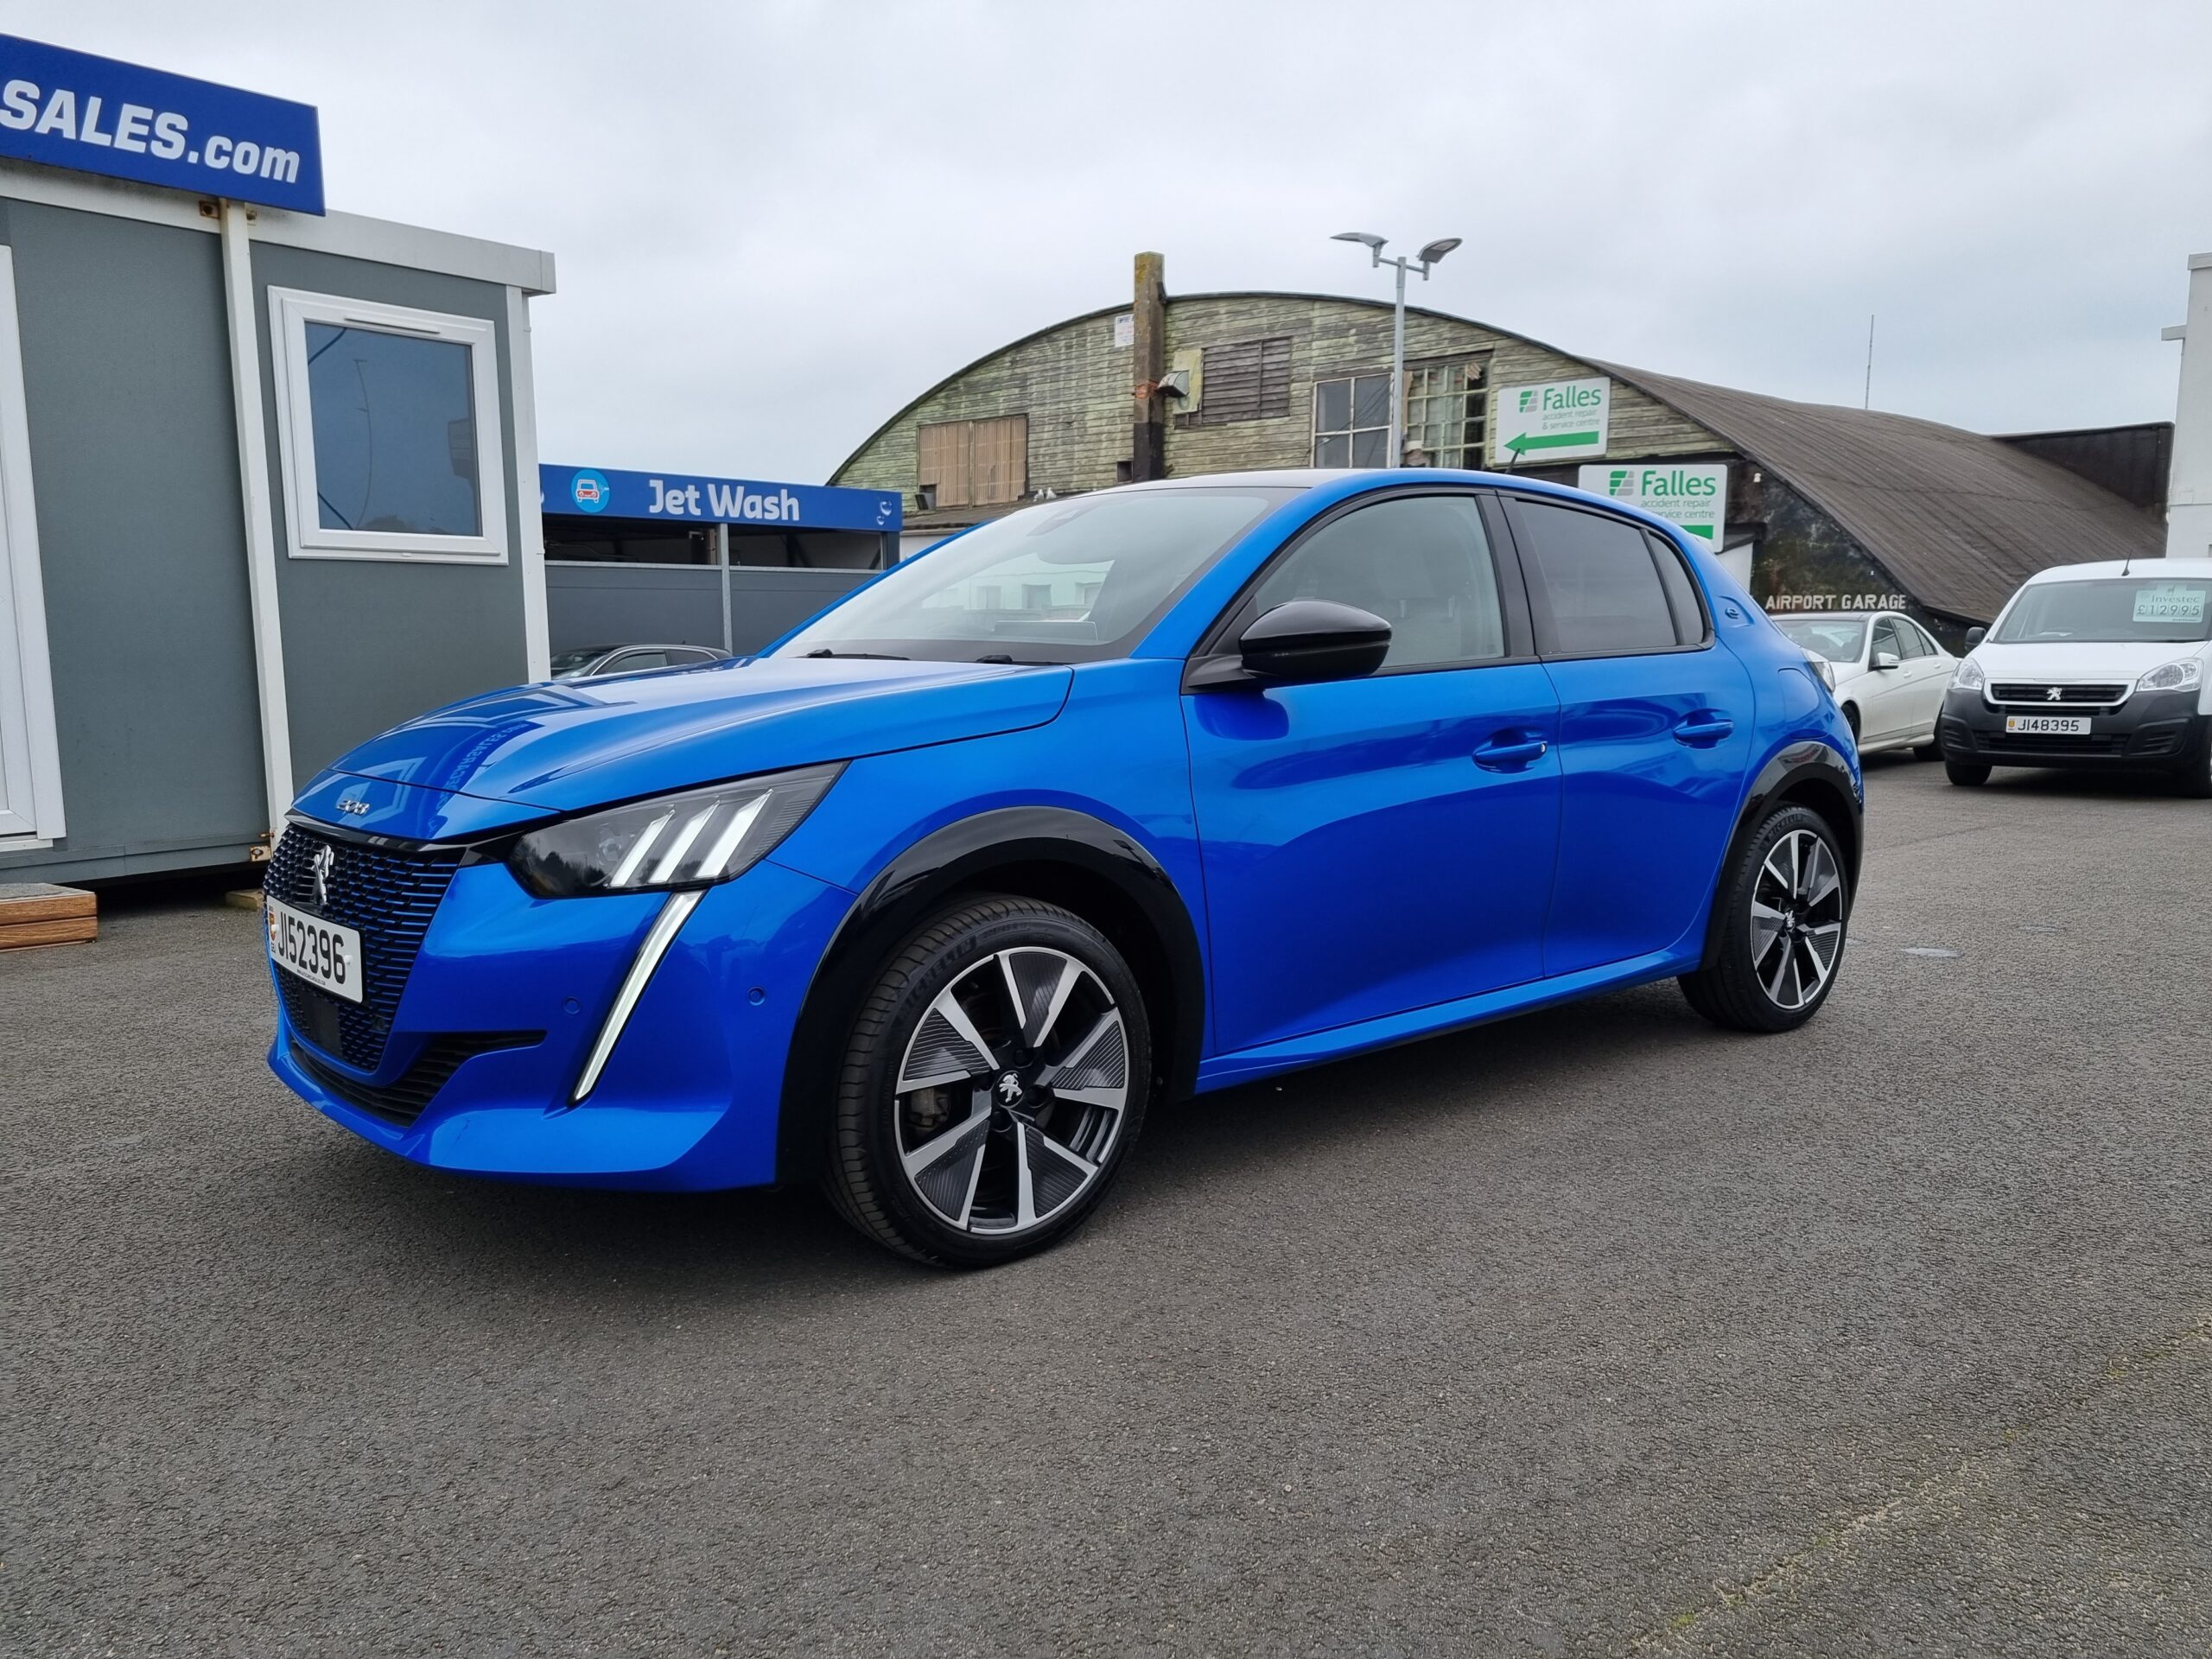 Ev Grant You Pay 154952021 Peugeot E 208 136bhp Gt Line 5drfully Electriccost New 33920 Now Only 18995 13